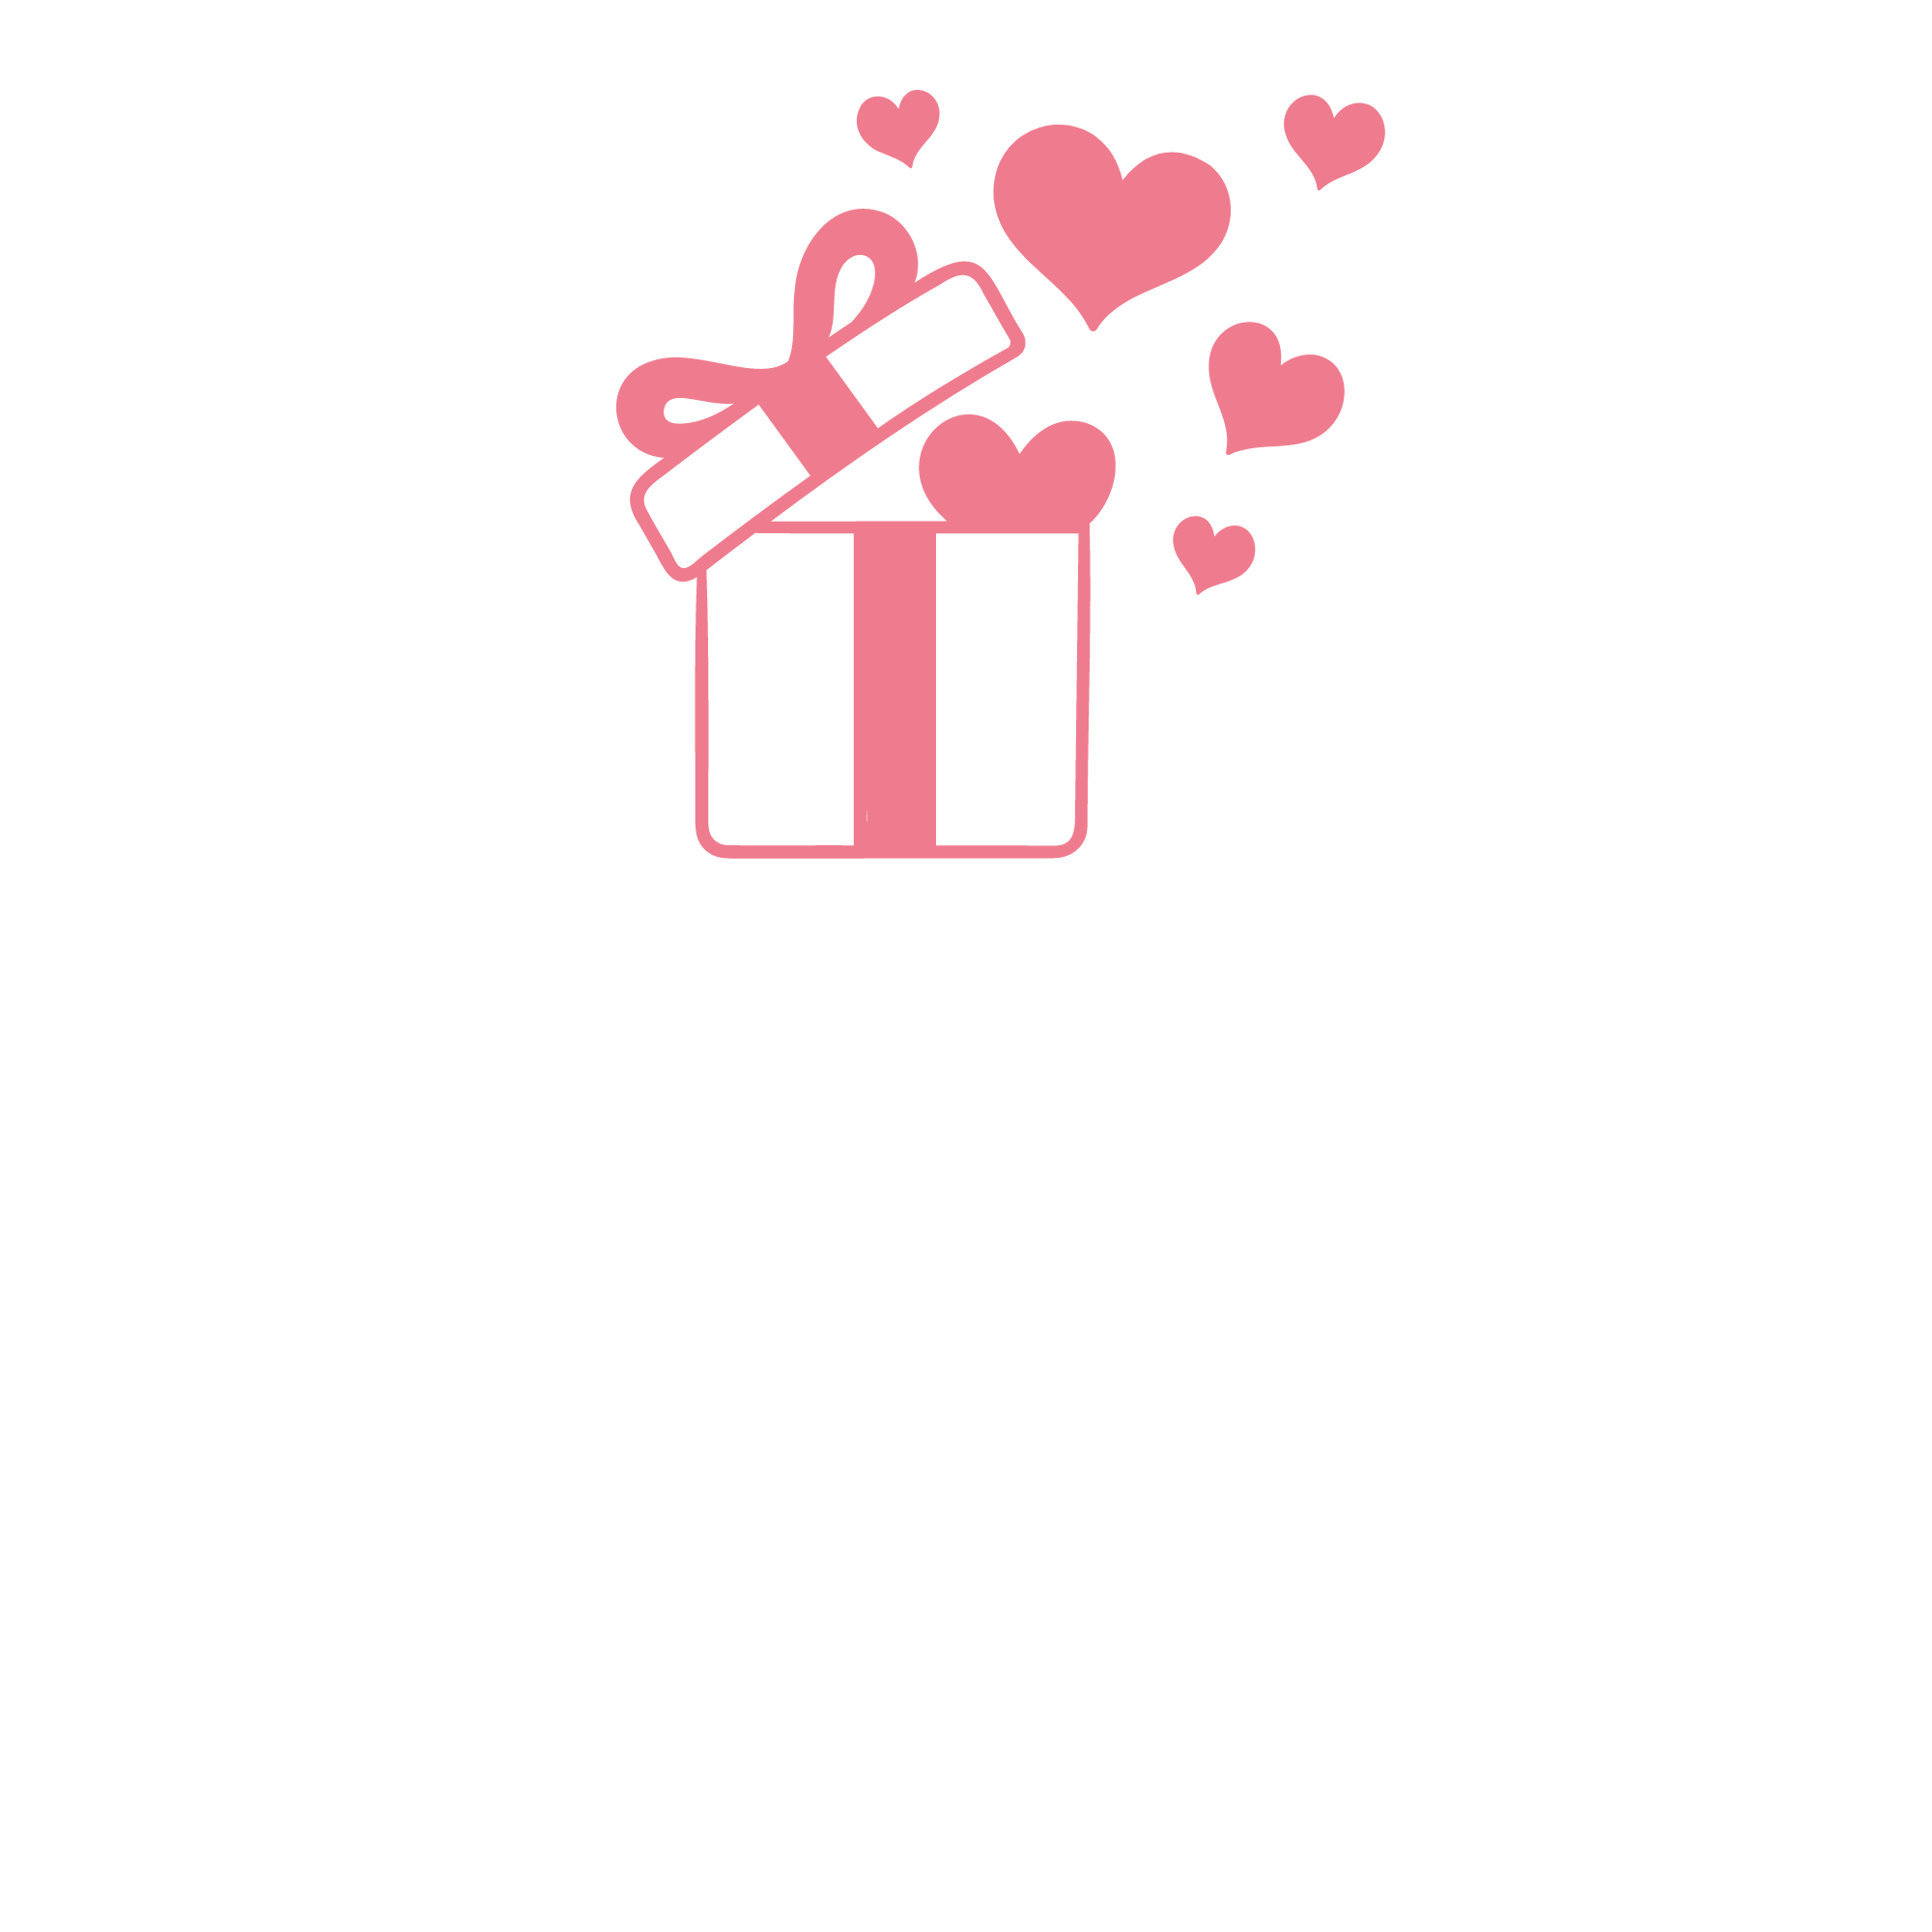 Sisterly Gifts